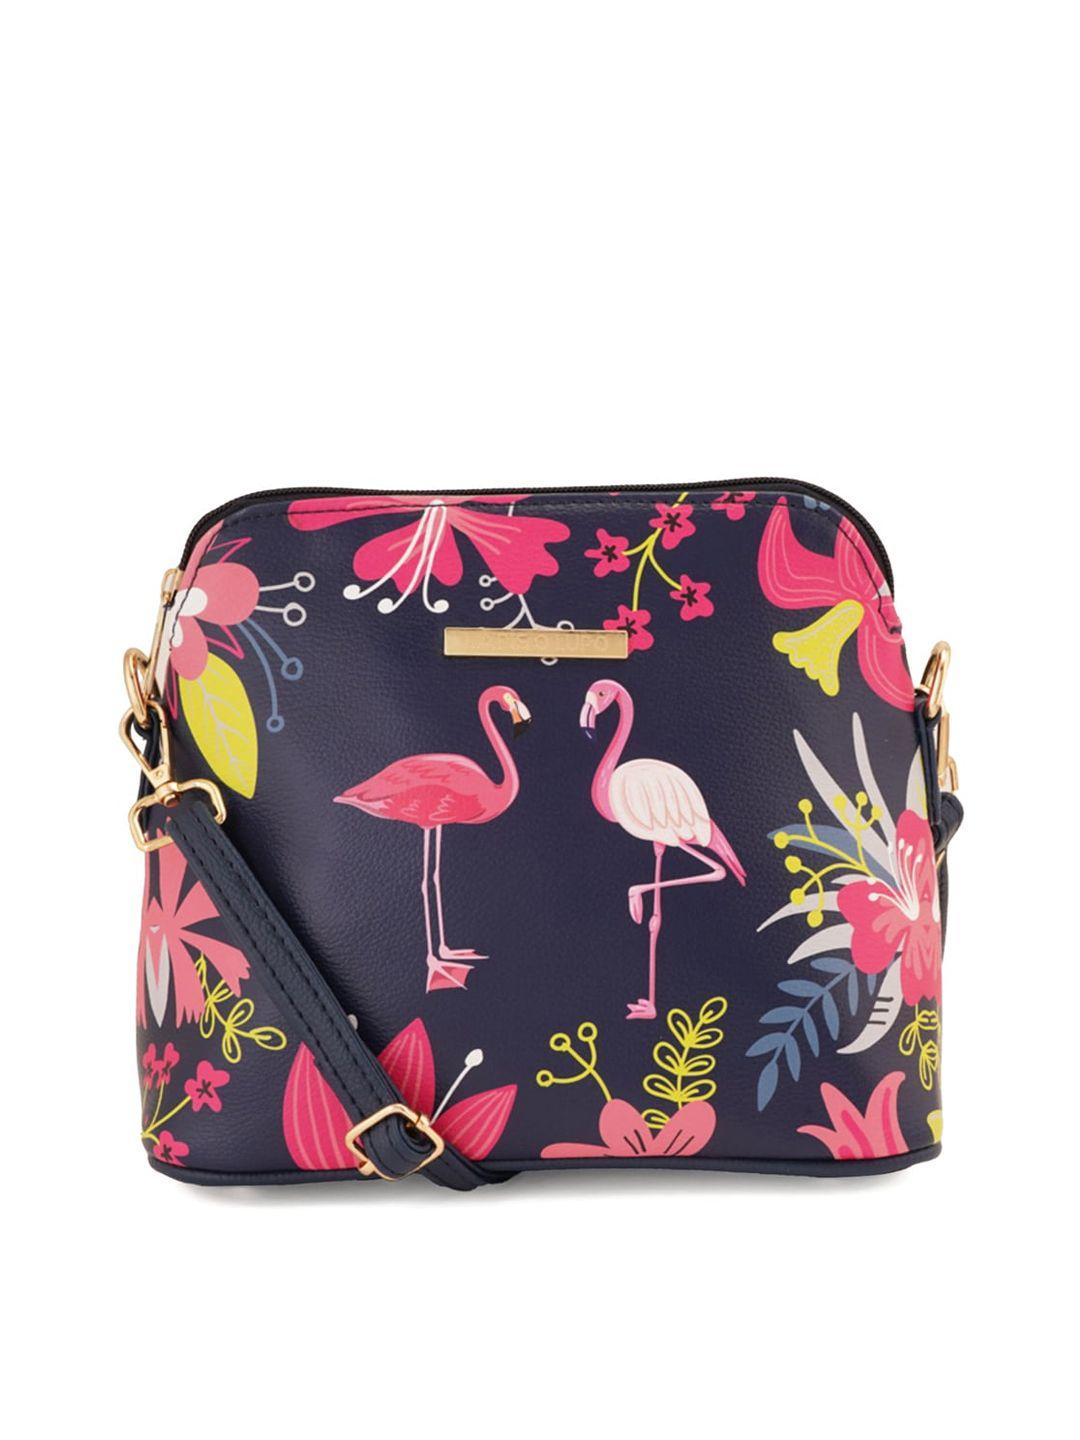 lapis o lupo floral printed structured sling bag